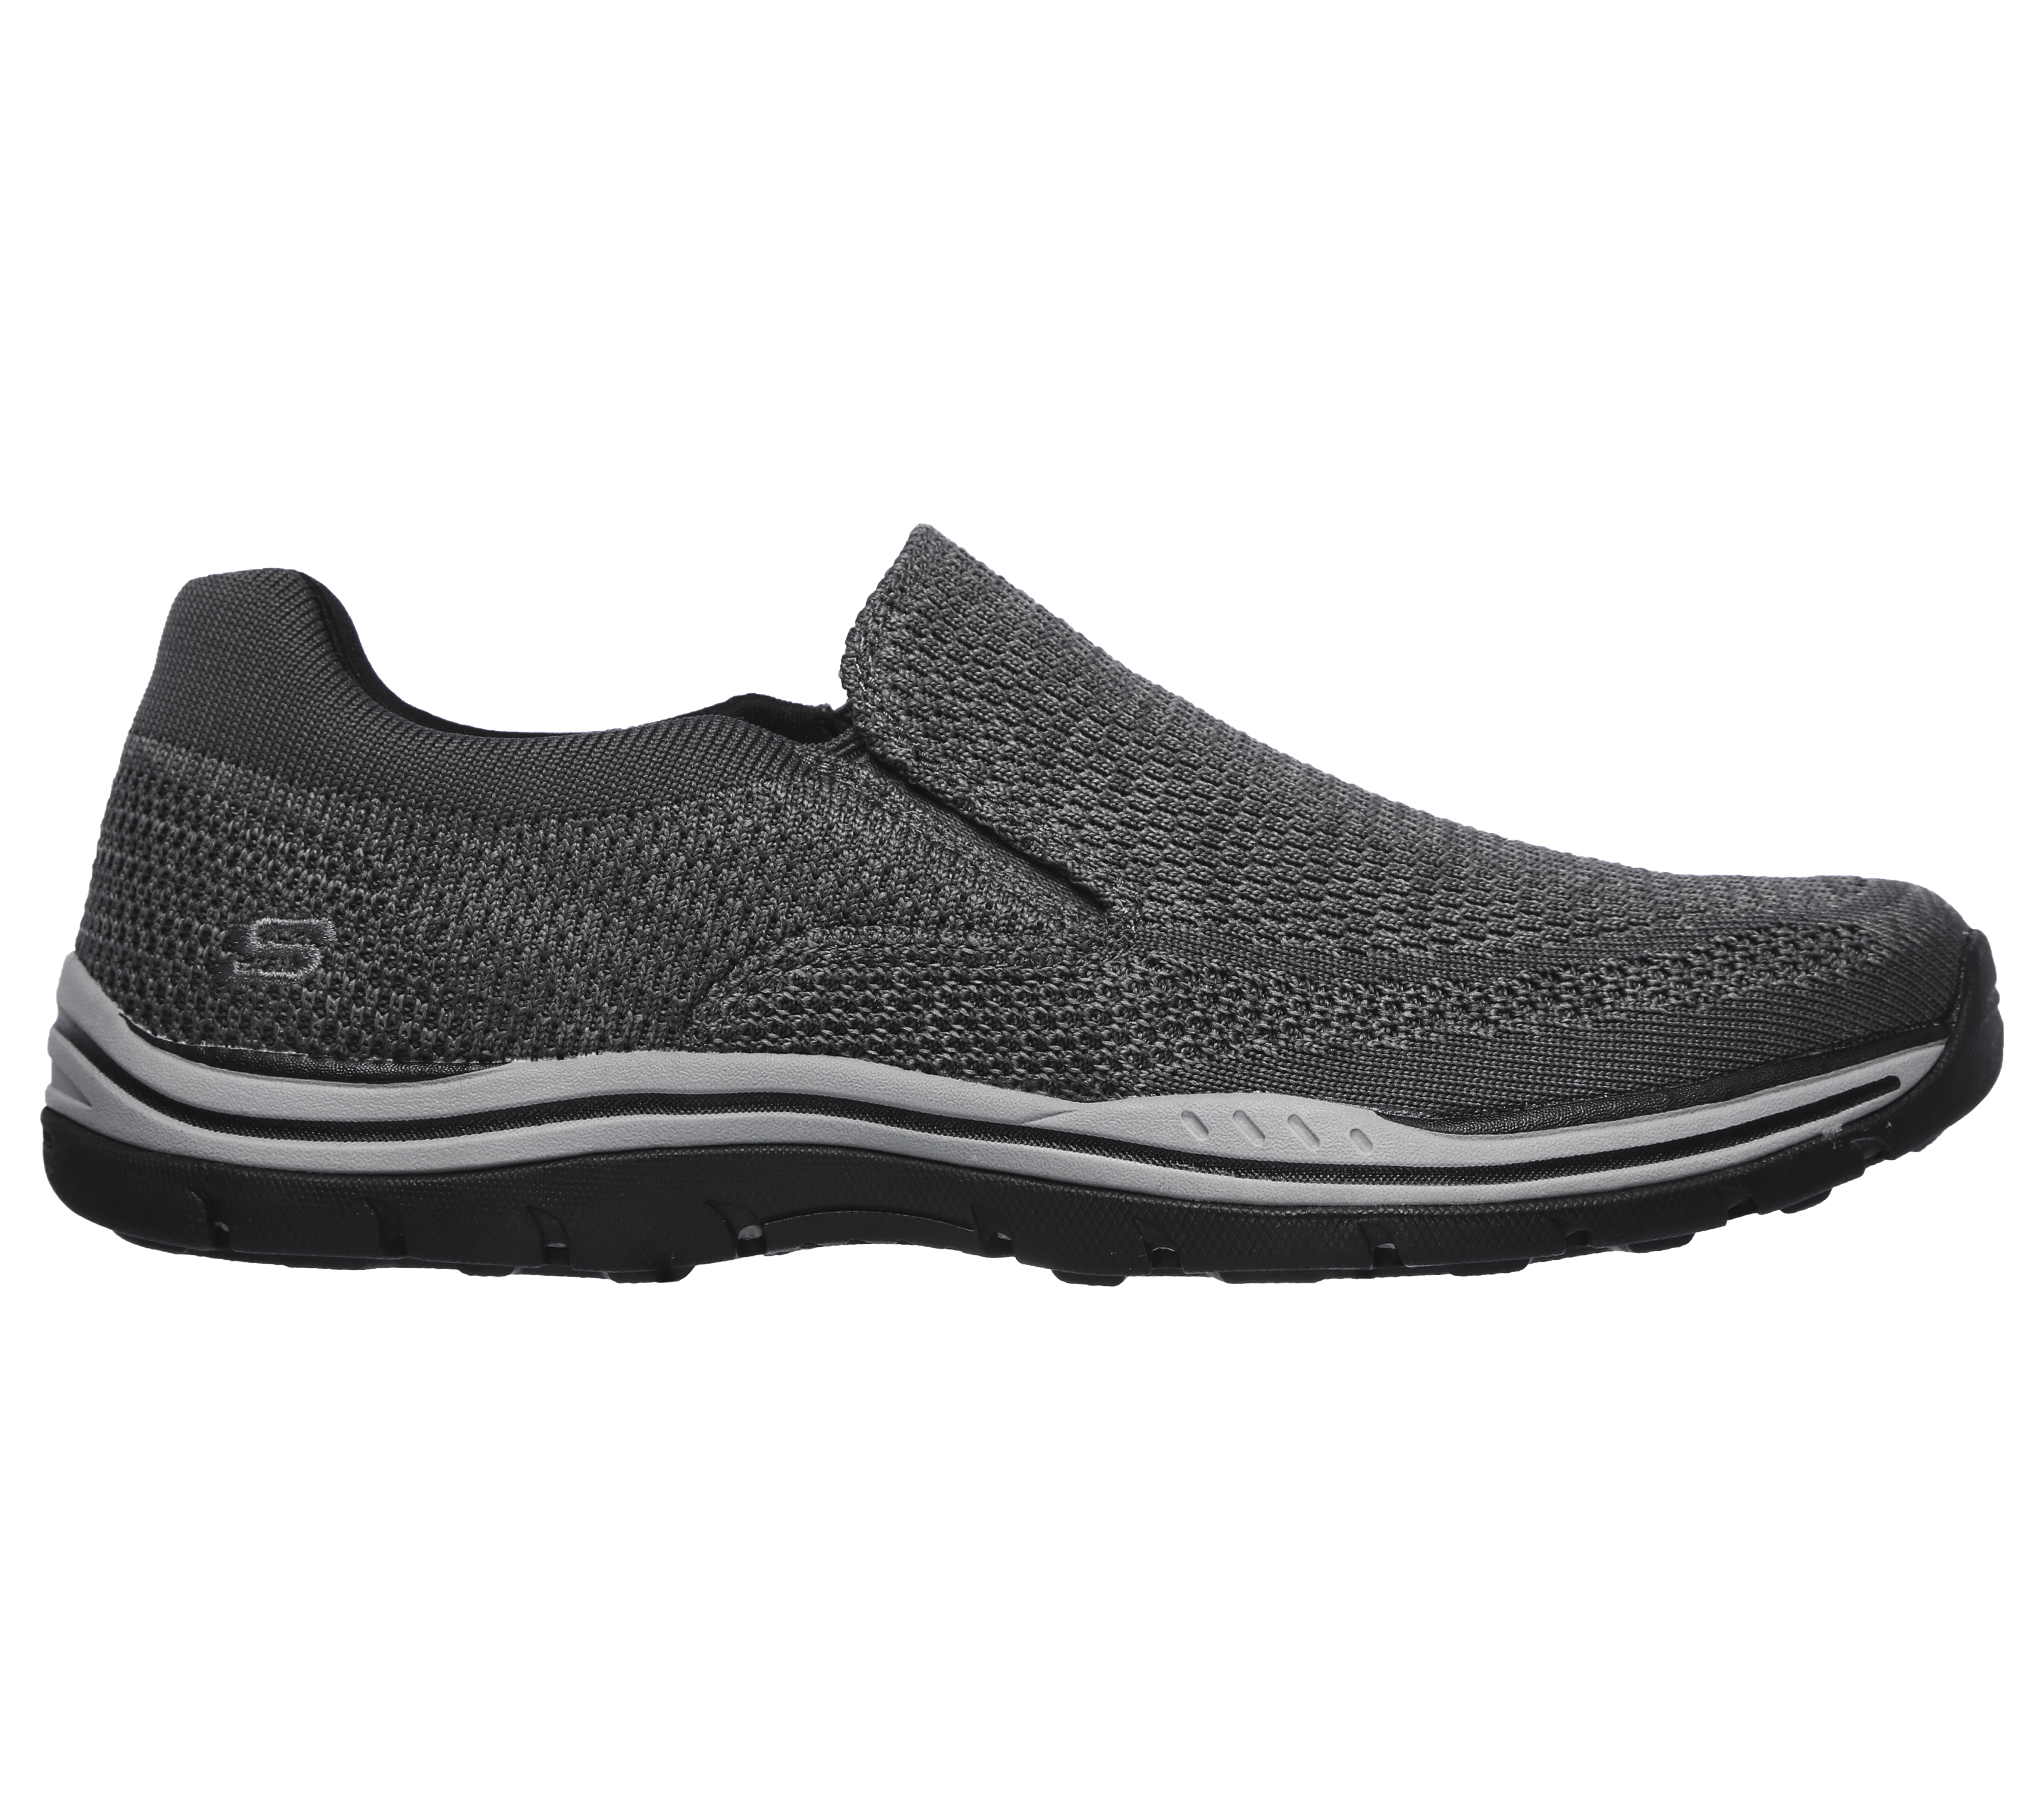 Memory Foam Relaxed Fit Skechers | woodhunger.com